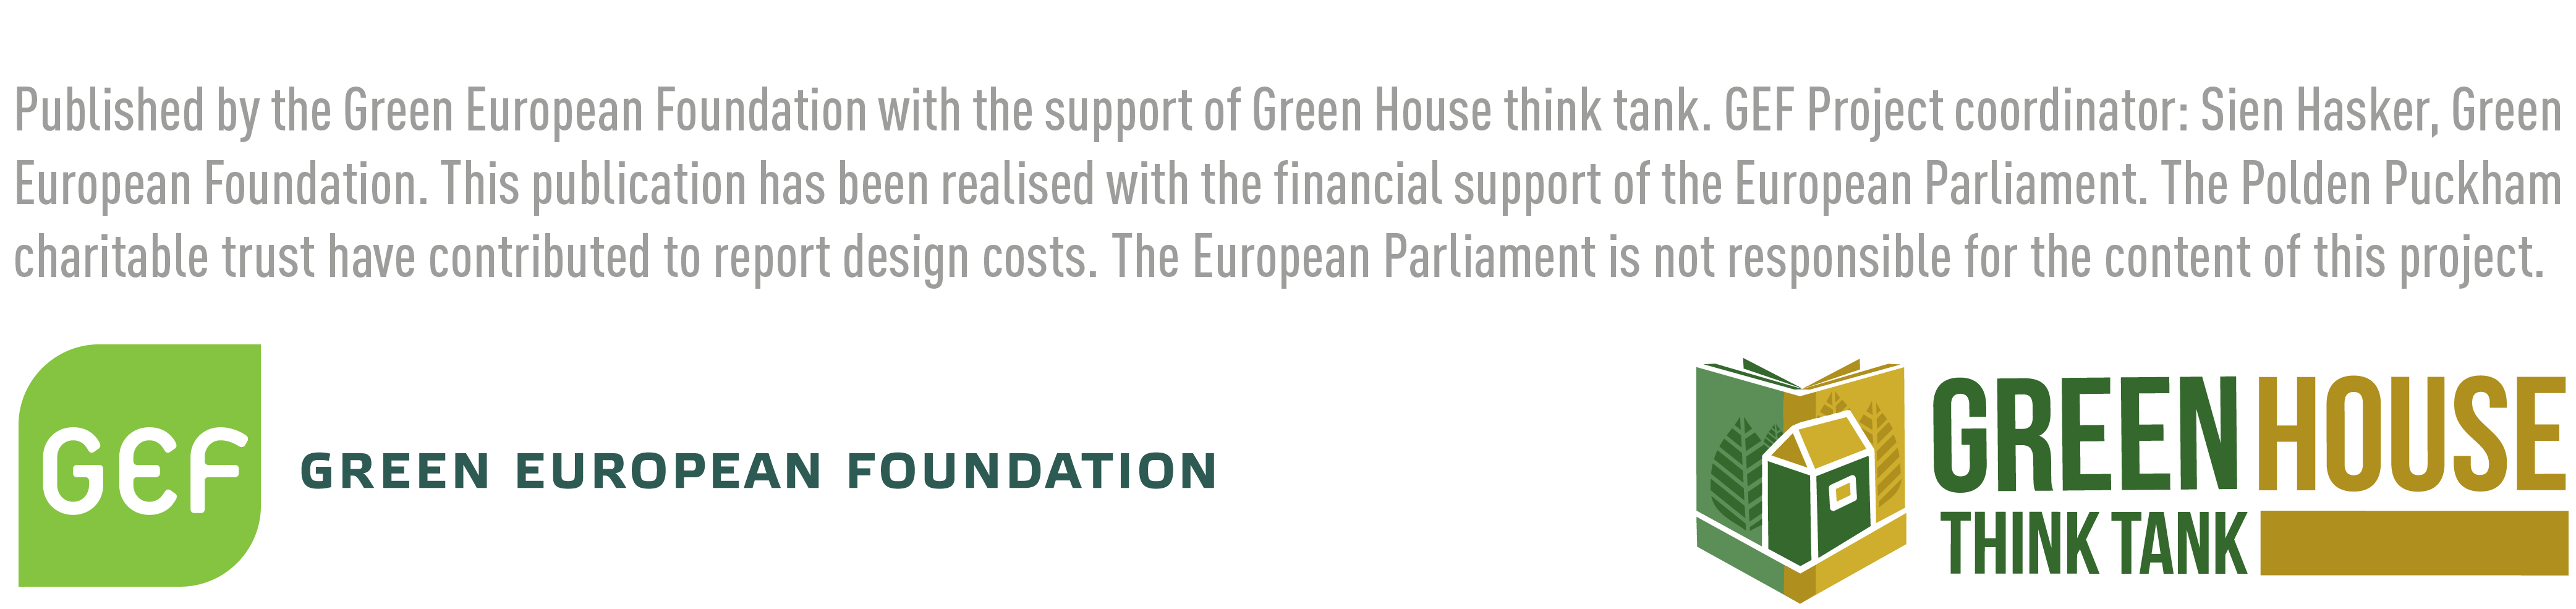 Images of the logos of the Green European Foundation and Green House Think Tank with text Published by the Green European Foundation with the support of Green House think tank. GEF project coordinator: Sian Hasker, Green European Foundation. This publication has been realised with financial support of the European parliament. The Polden Puckham charitable trust have contributed to the report design costs. The European Parliament is not responsible for the content of this project. that reads 